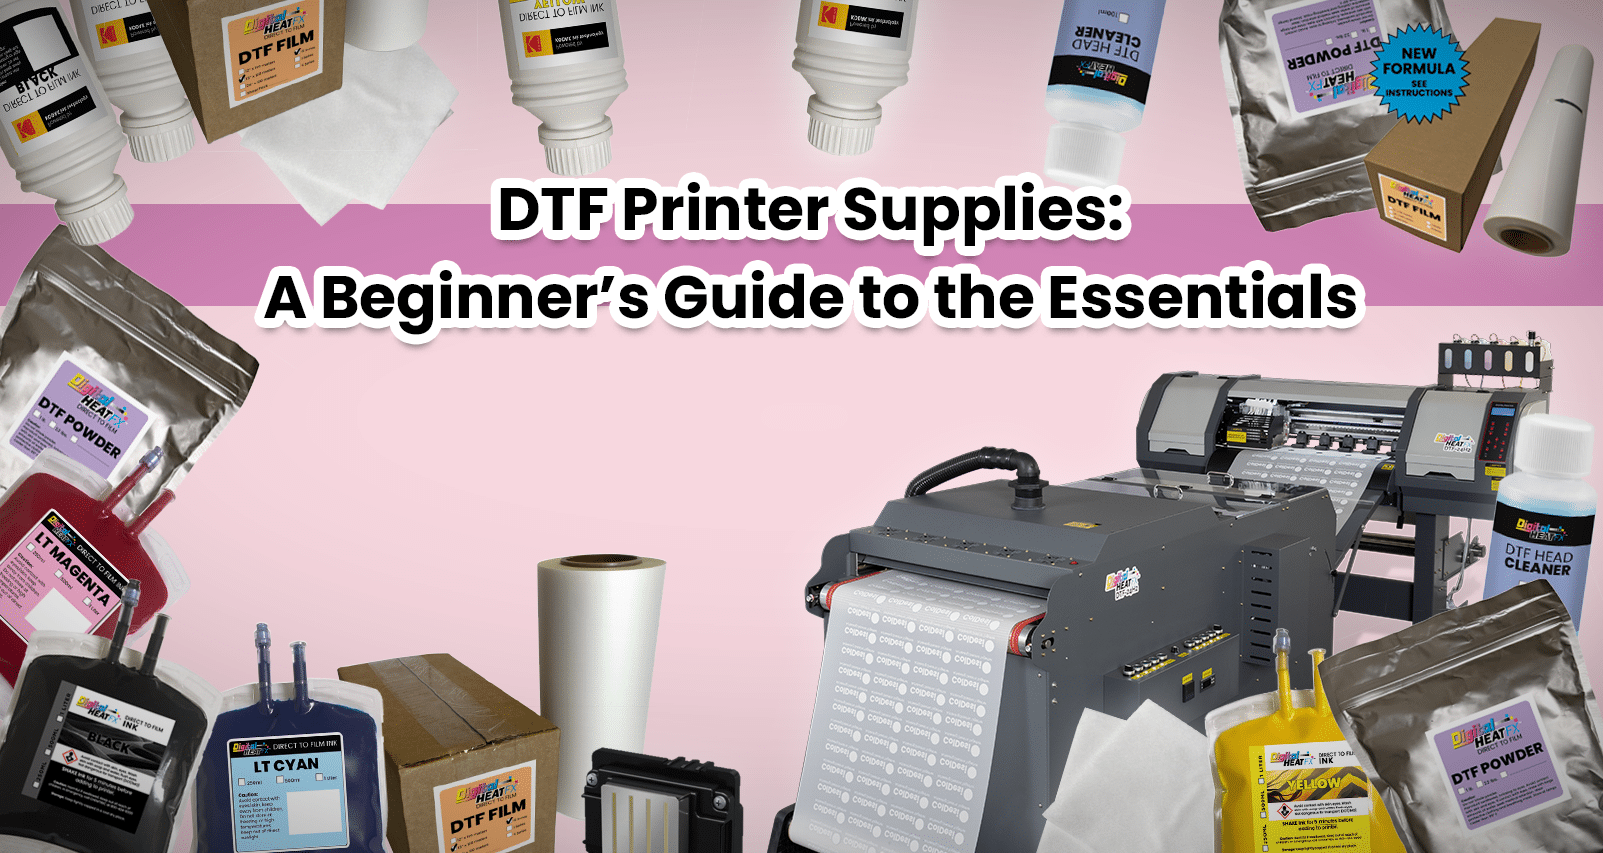 DTF Printer Supplies: A Beginner’s Guide to the Essentials